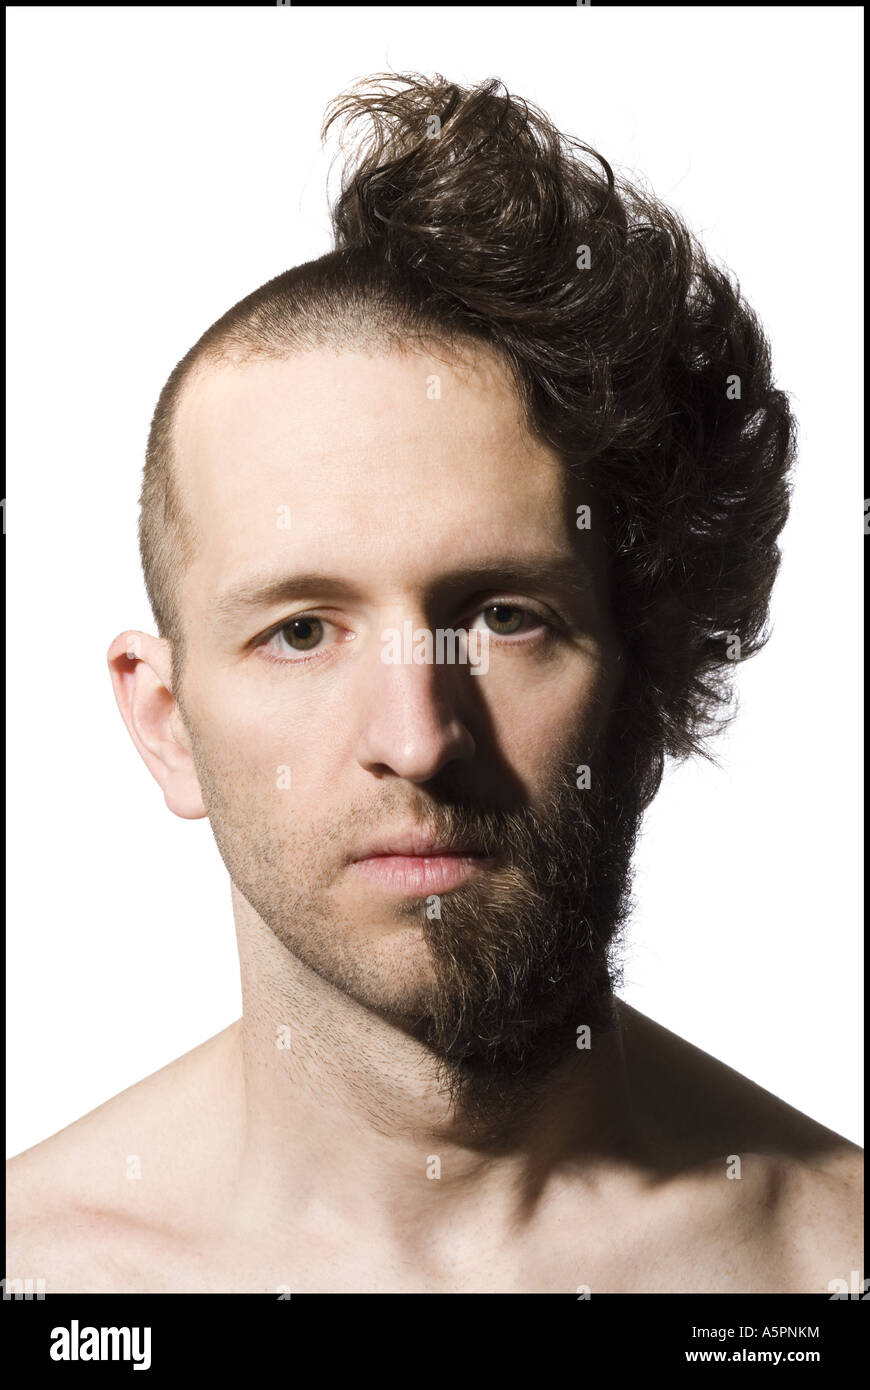 Pictures Of Shaved Men 48